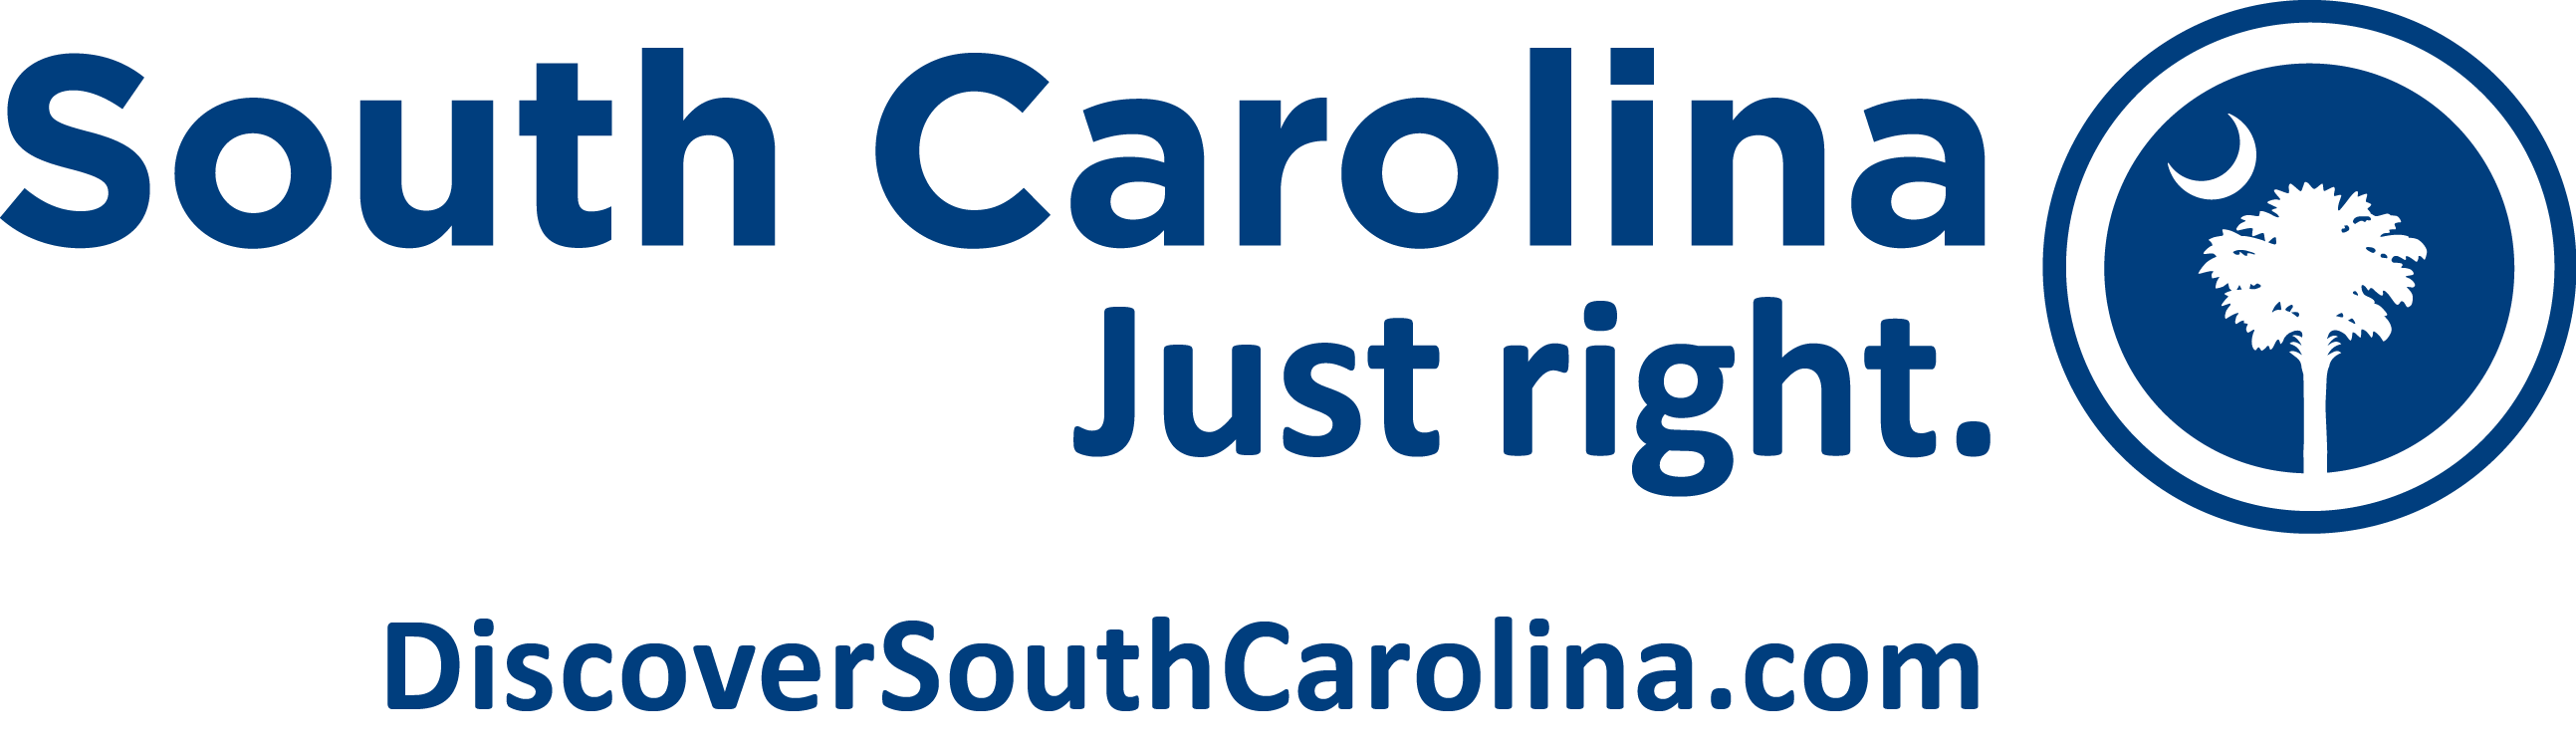 URL Logo - SC Just Right URL Logo – transparent | Conway Chamber of Commerce